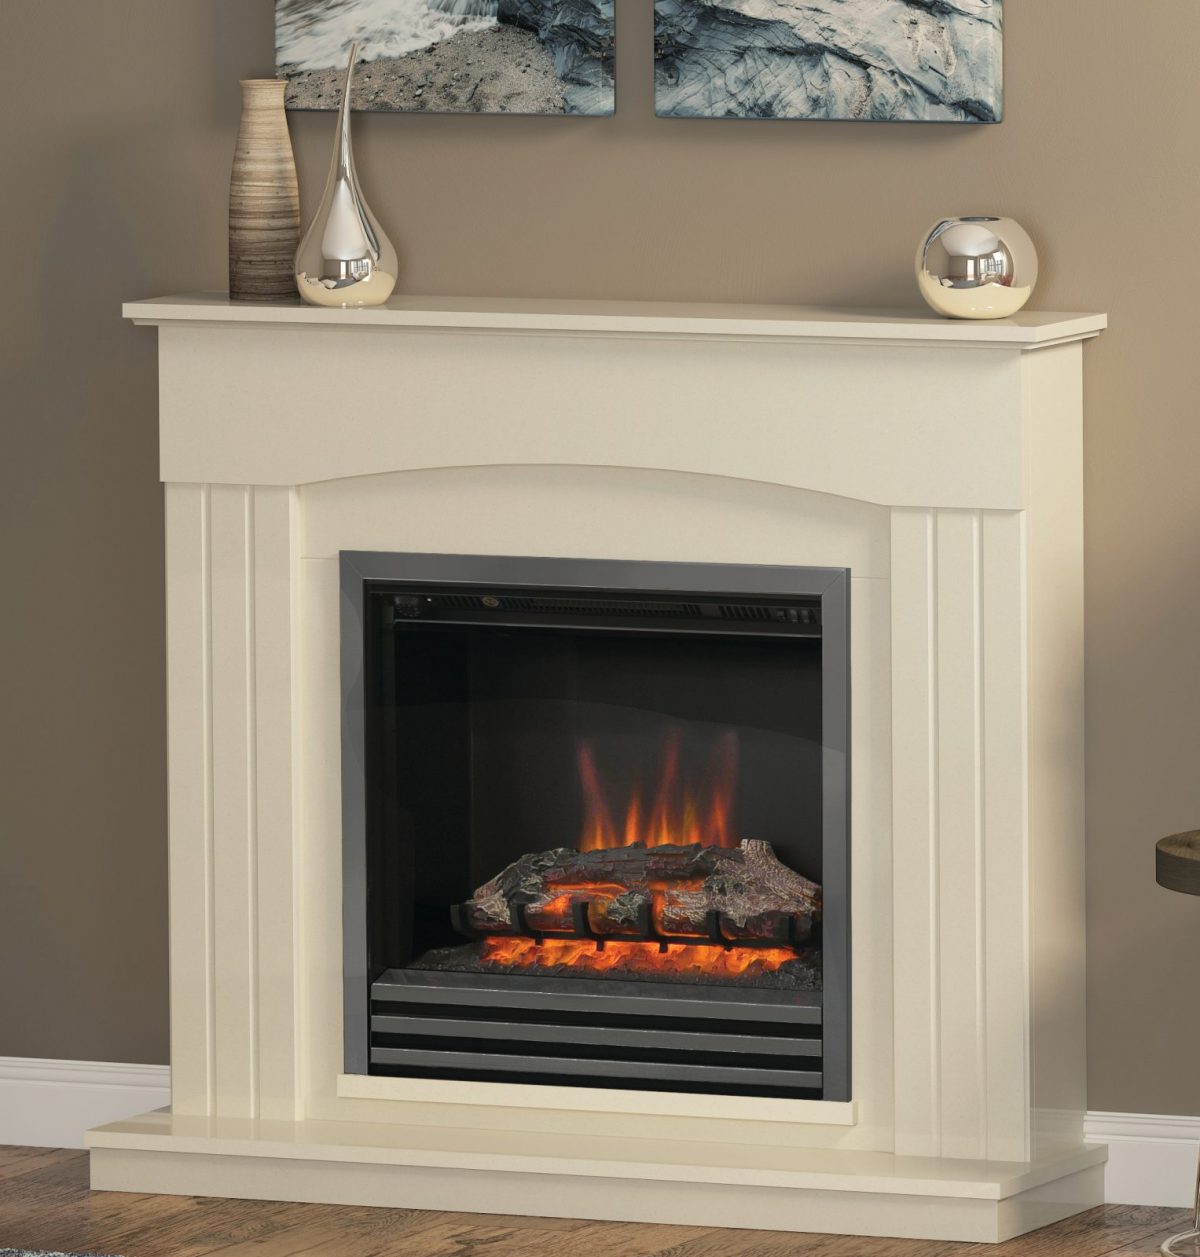 44″ Linmere fireplace in Almond Stone effect with Black Nickel Finish Electric Fire